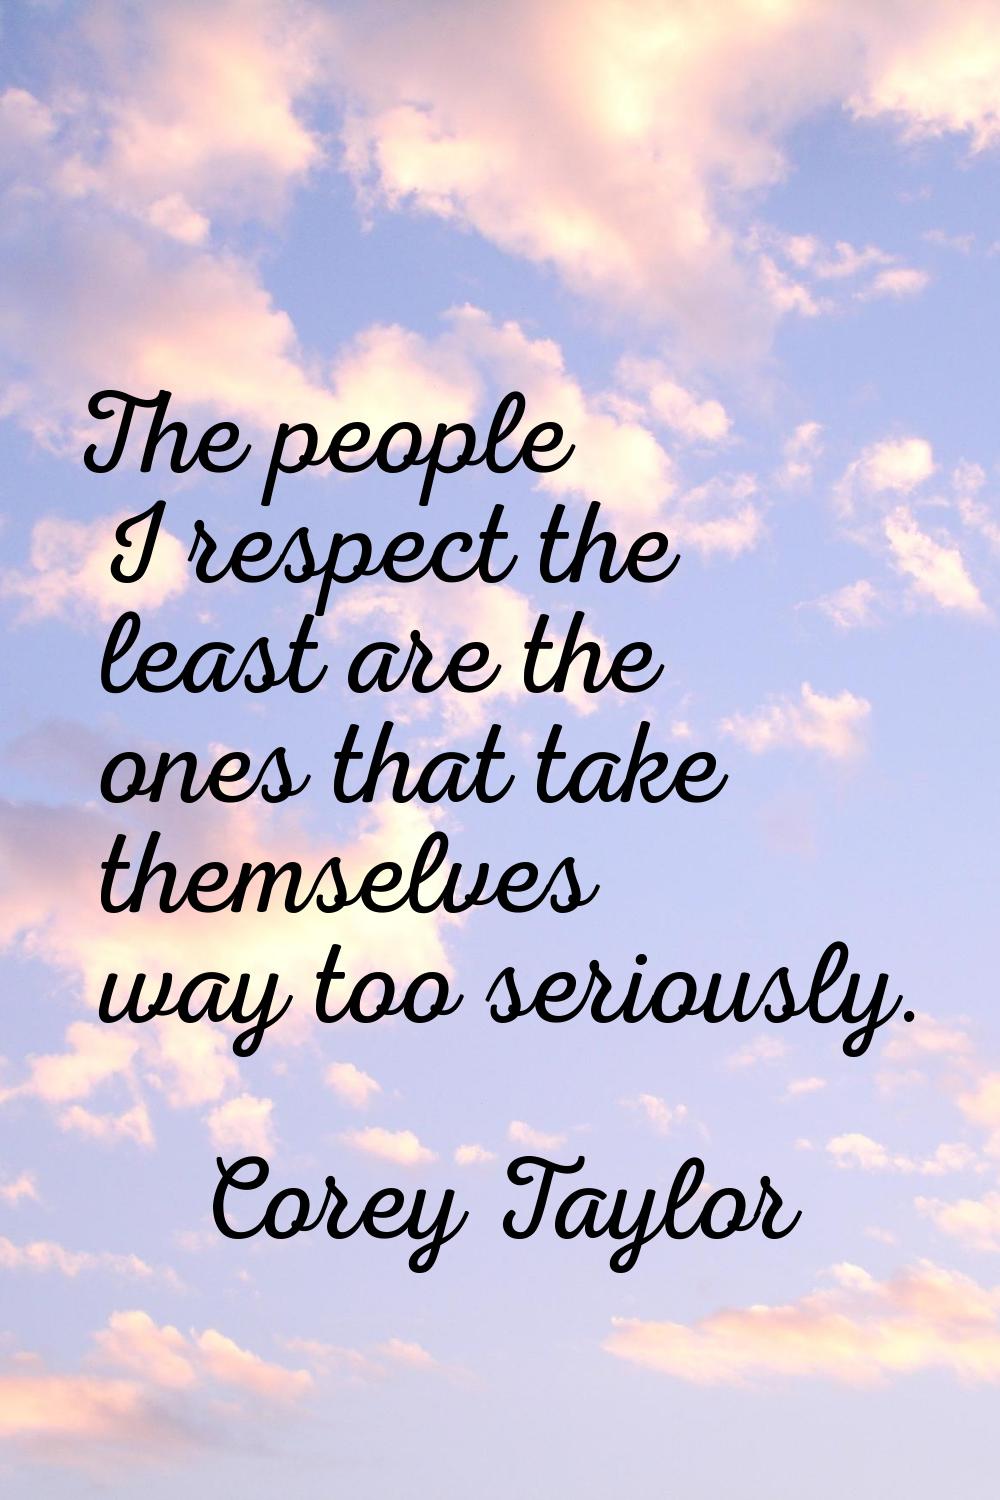 The people I respect the least are the ones that take themselves way too seriously.